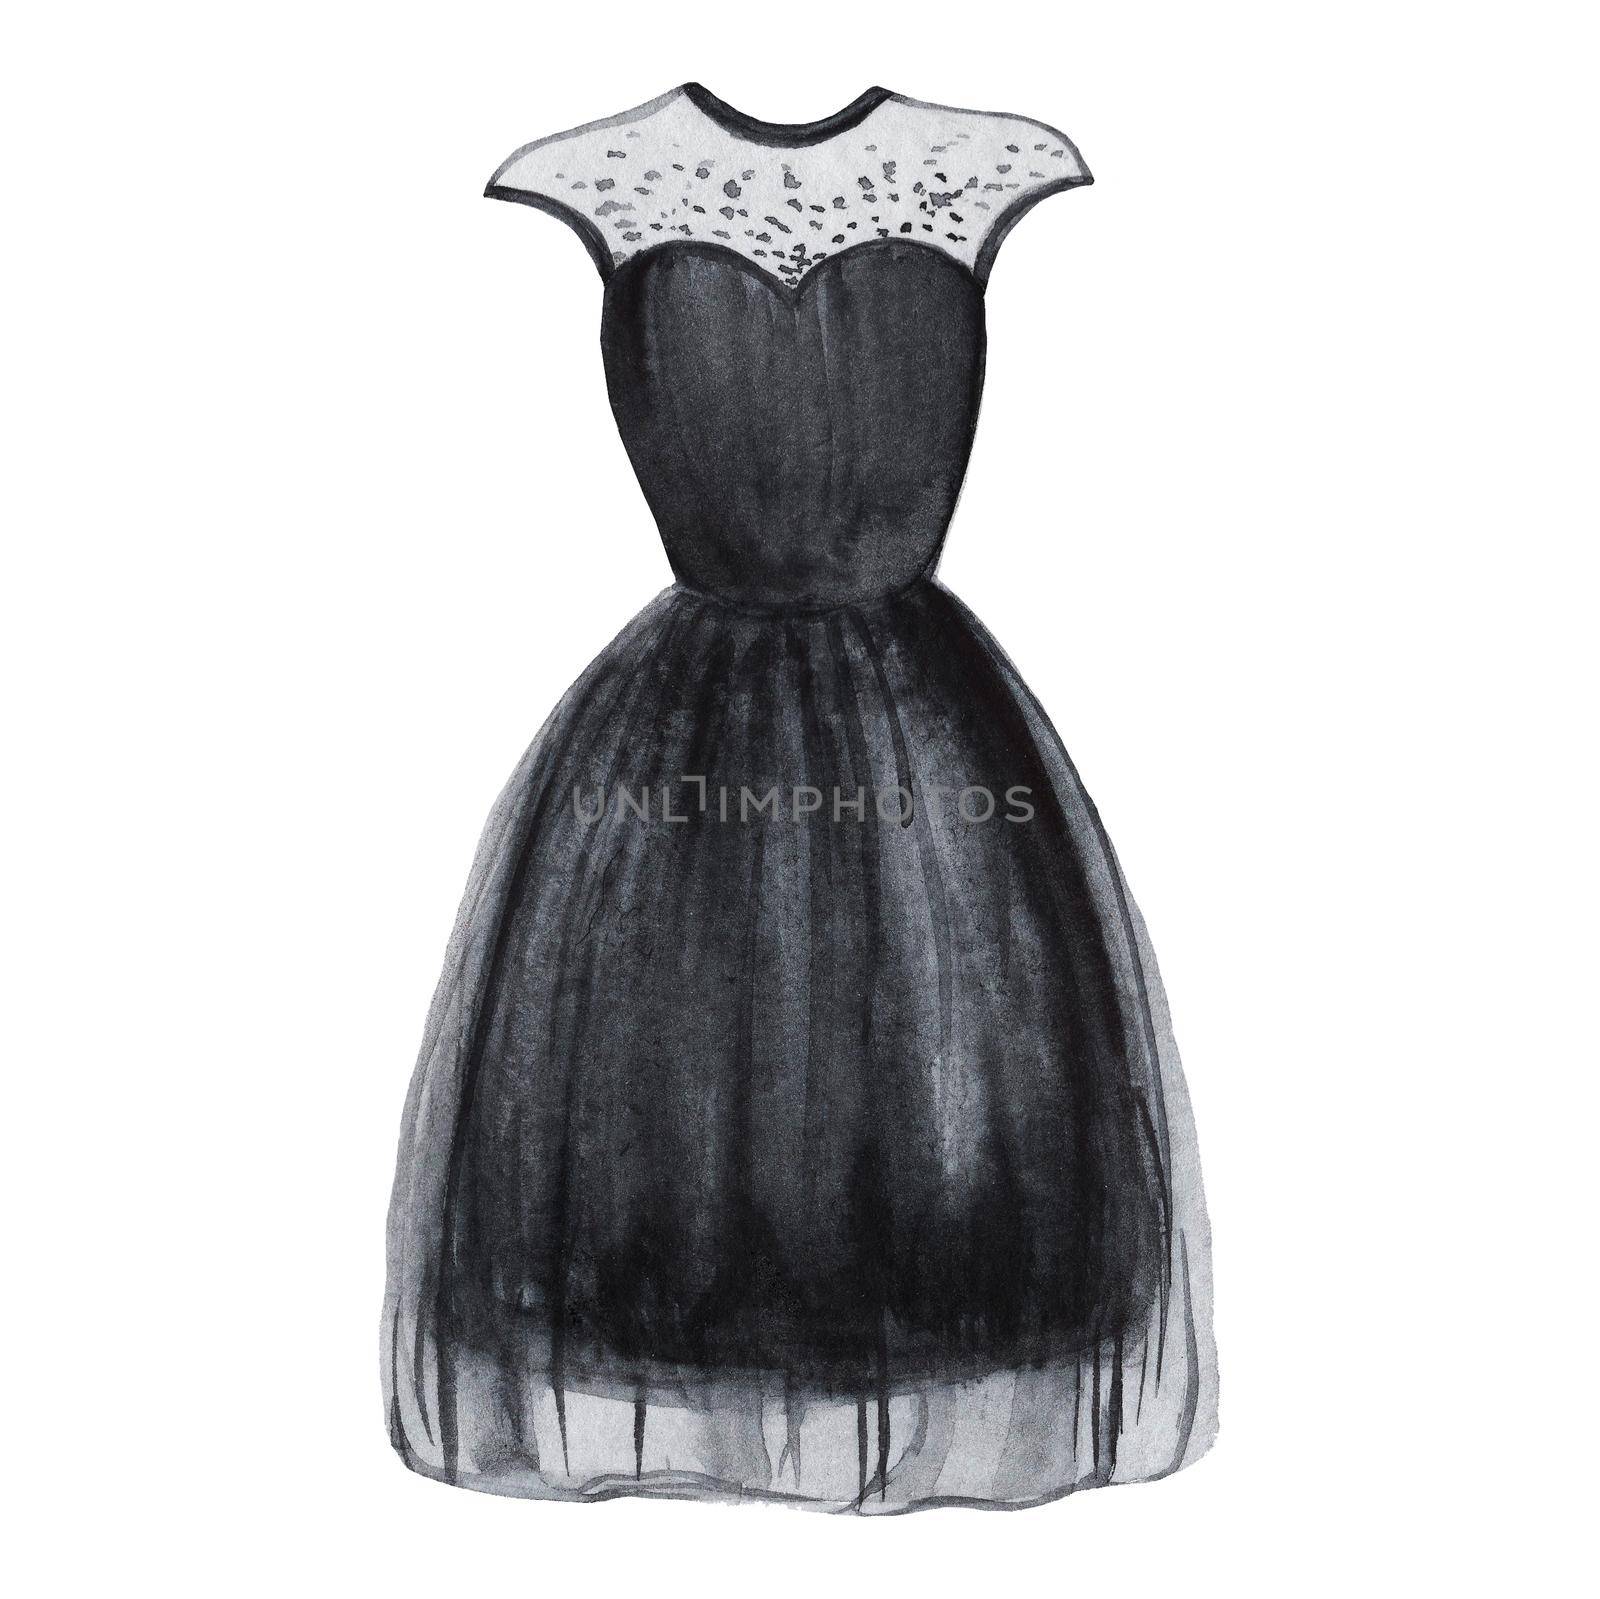 watercolor hand drawn black dress isolated on white background